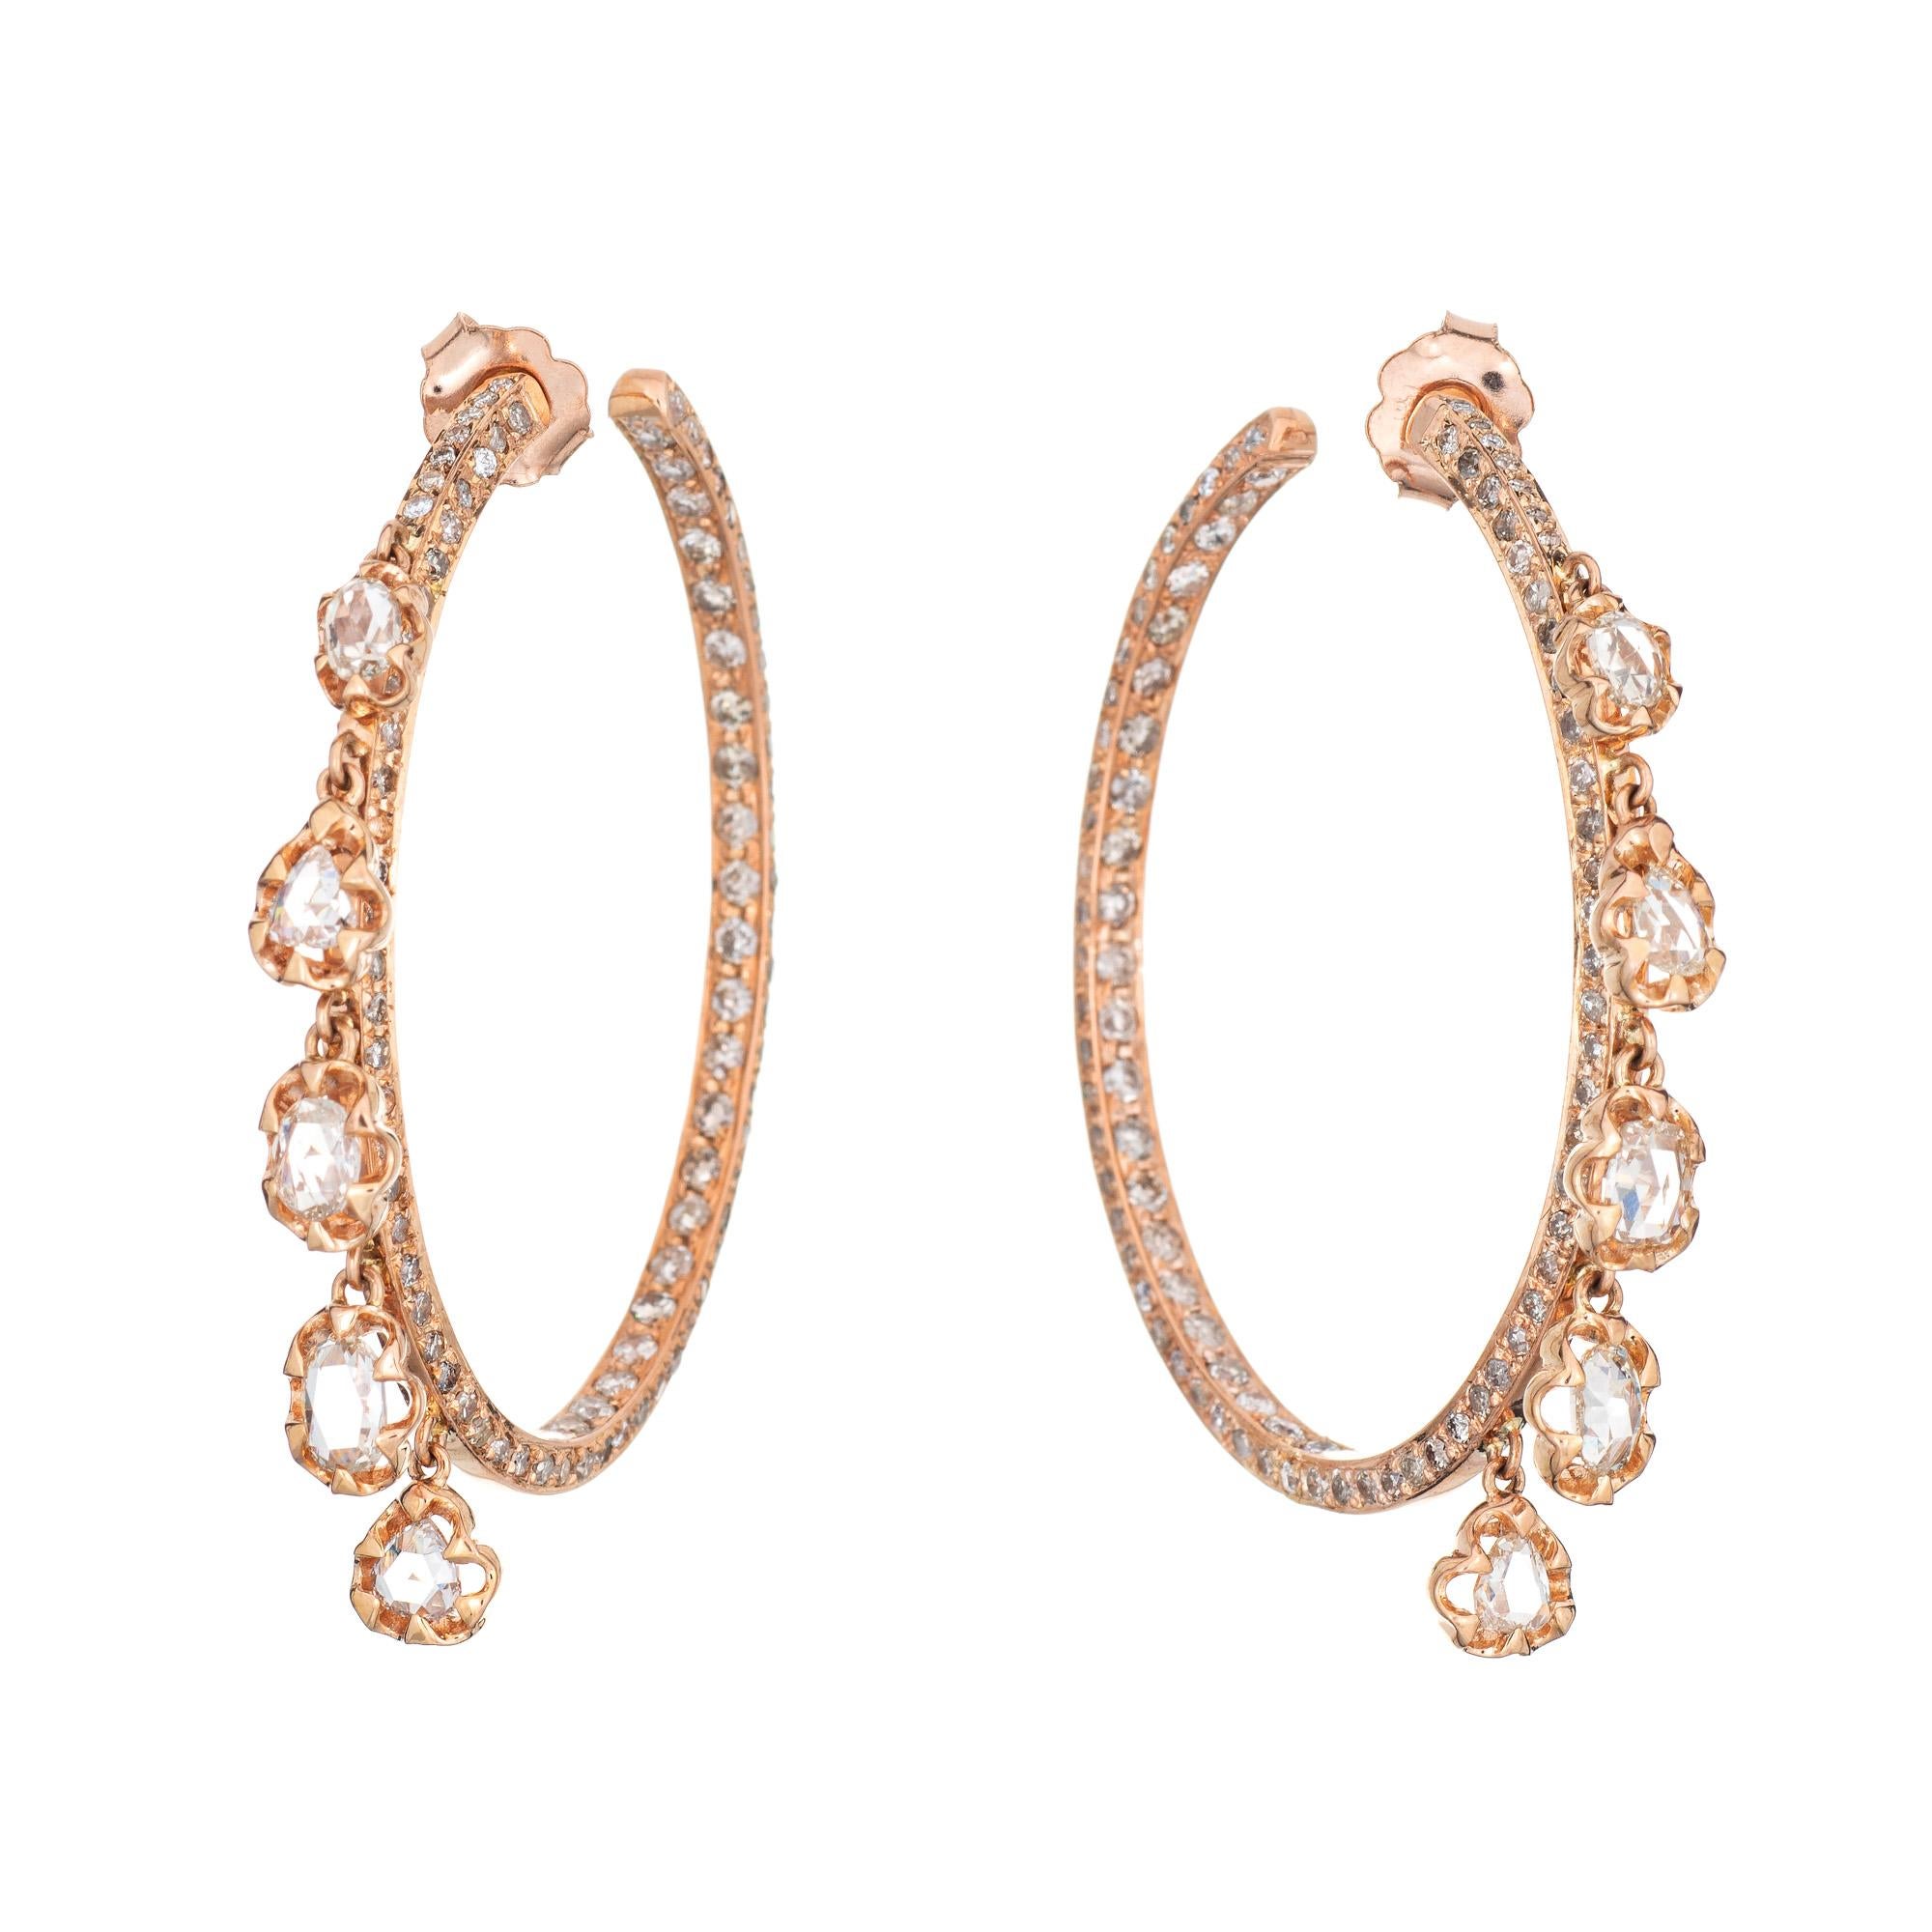 Contemporary 1.50ct Diamond Fringe Hoop Earrings Estate 18k Rose Gold Inside Out Jewelry For Sale